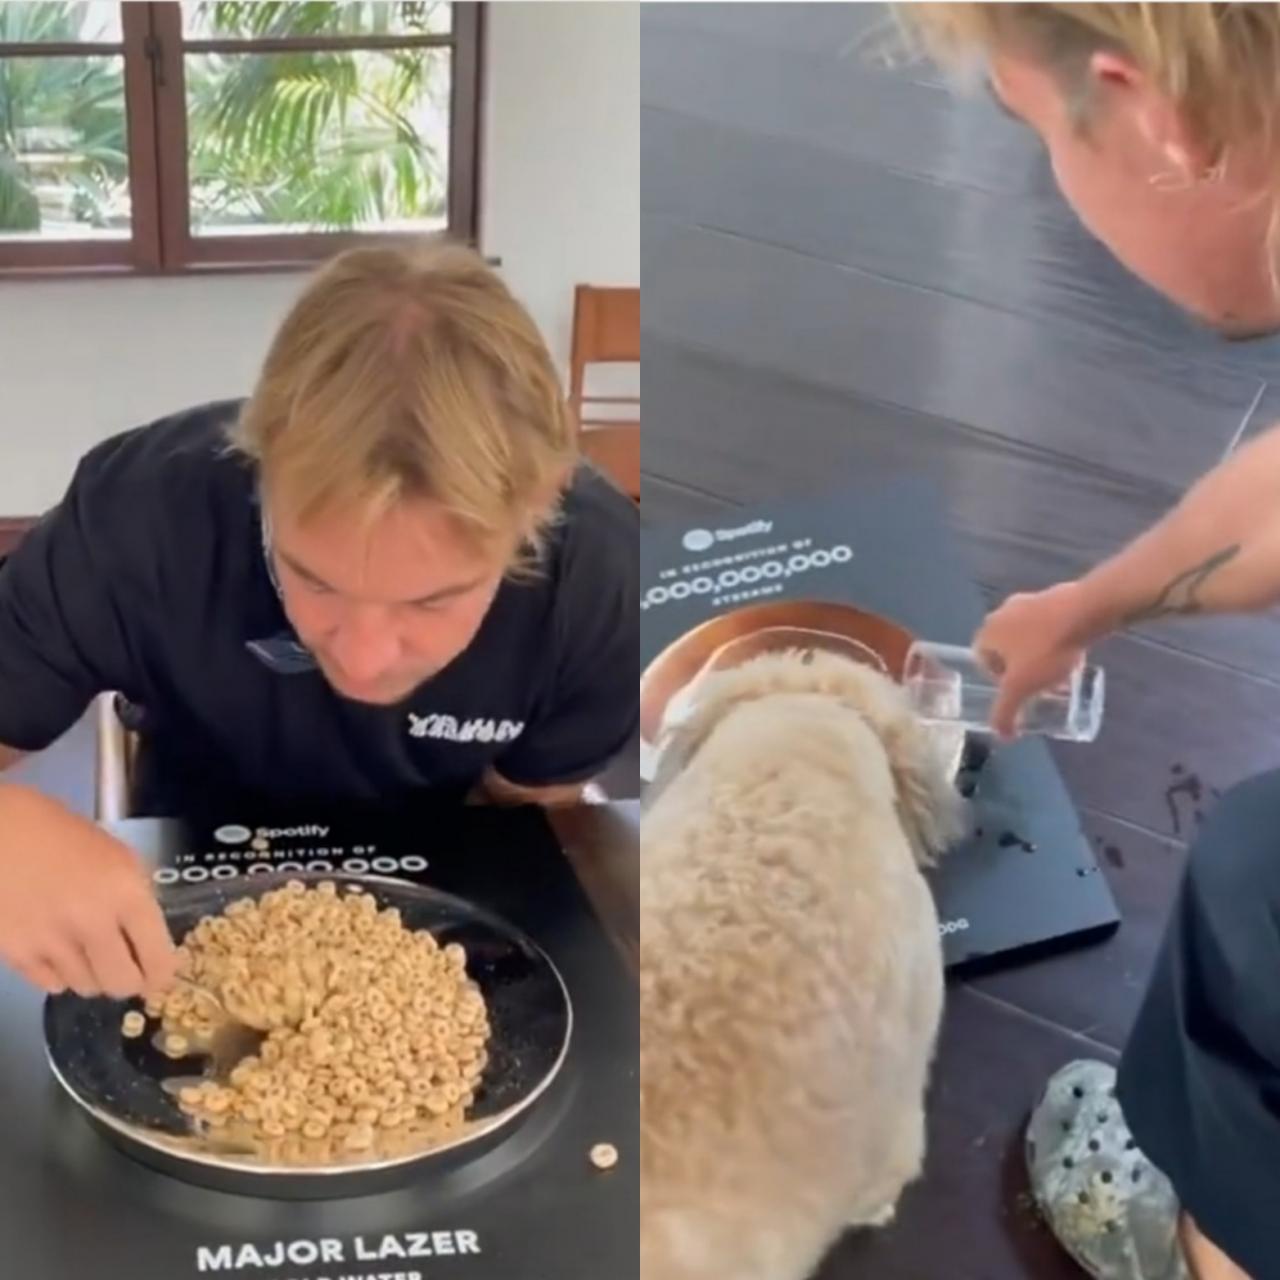 American DJ, Diplo uses Spotify plaque as a dog bowl and a plate to eat his cereal (video)